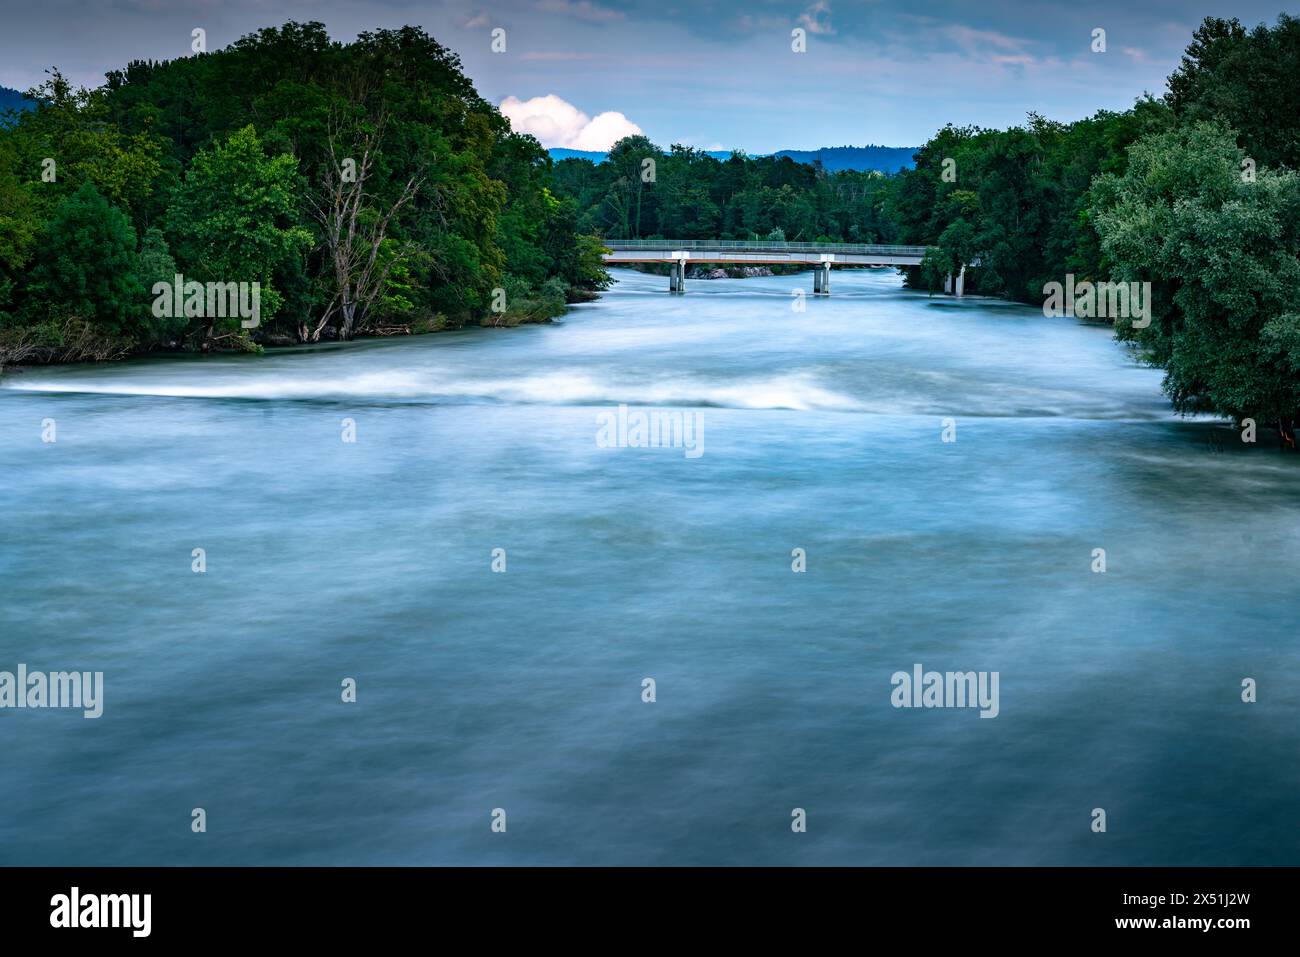 River after some days of heavy rain. Water smoothed with long time exposure. Beautiful blue and white colors contrasting to the green of the trees and Stock Photo